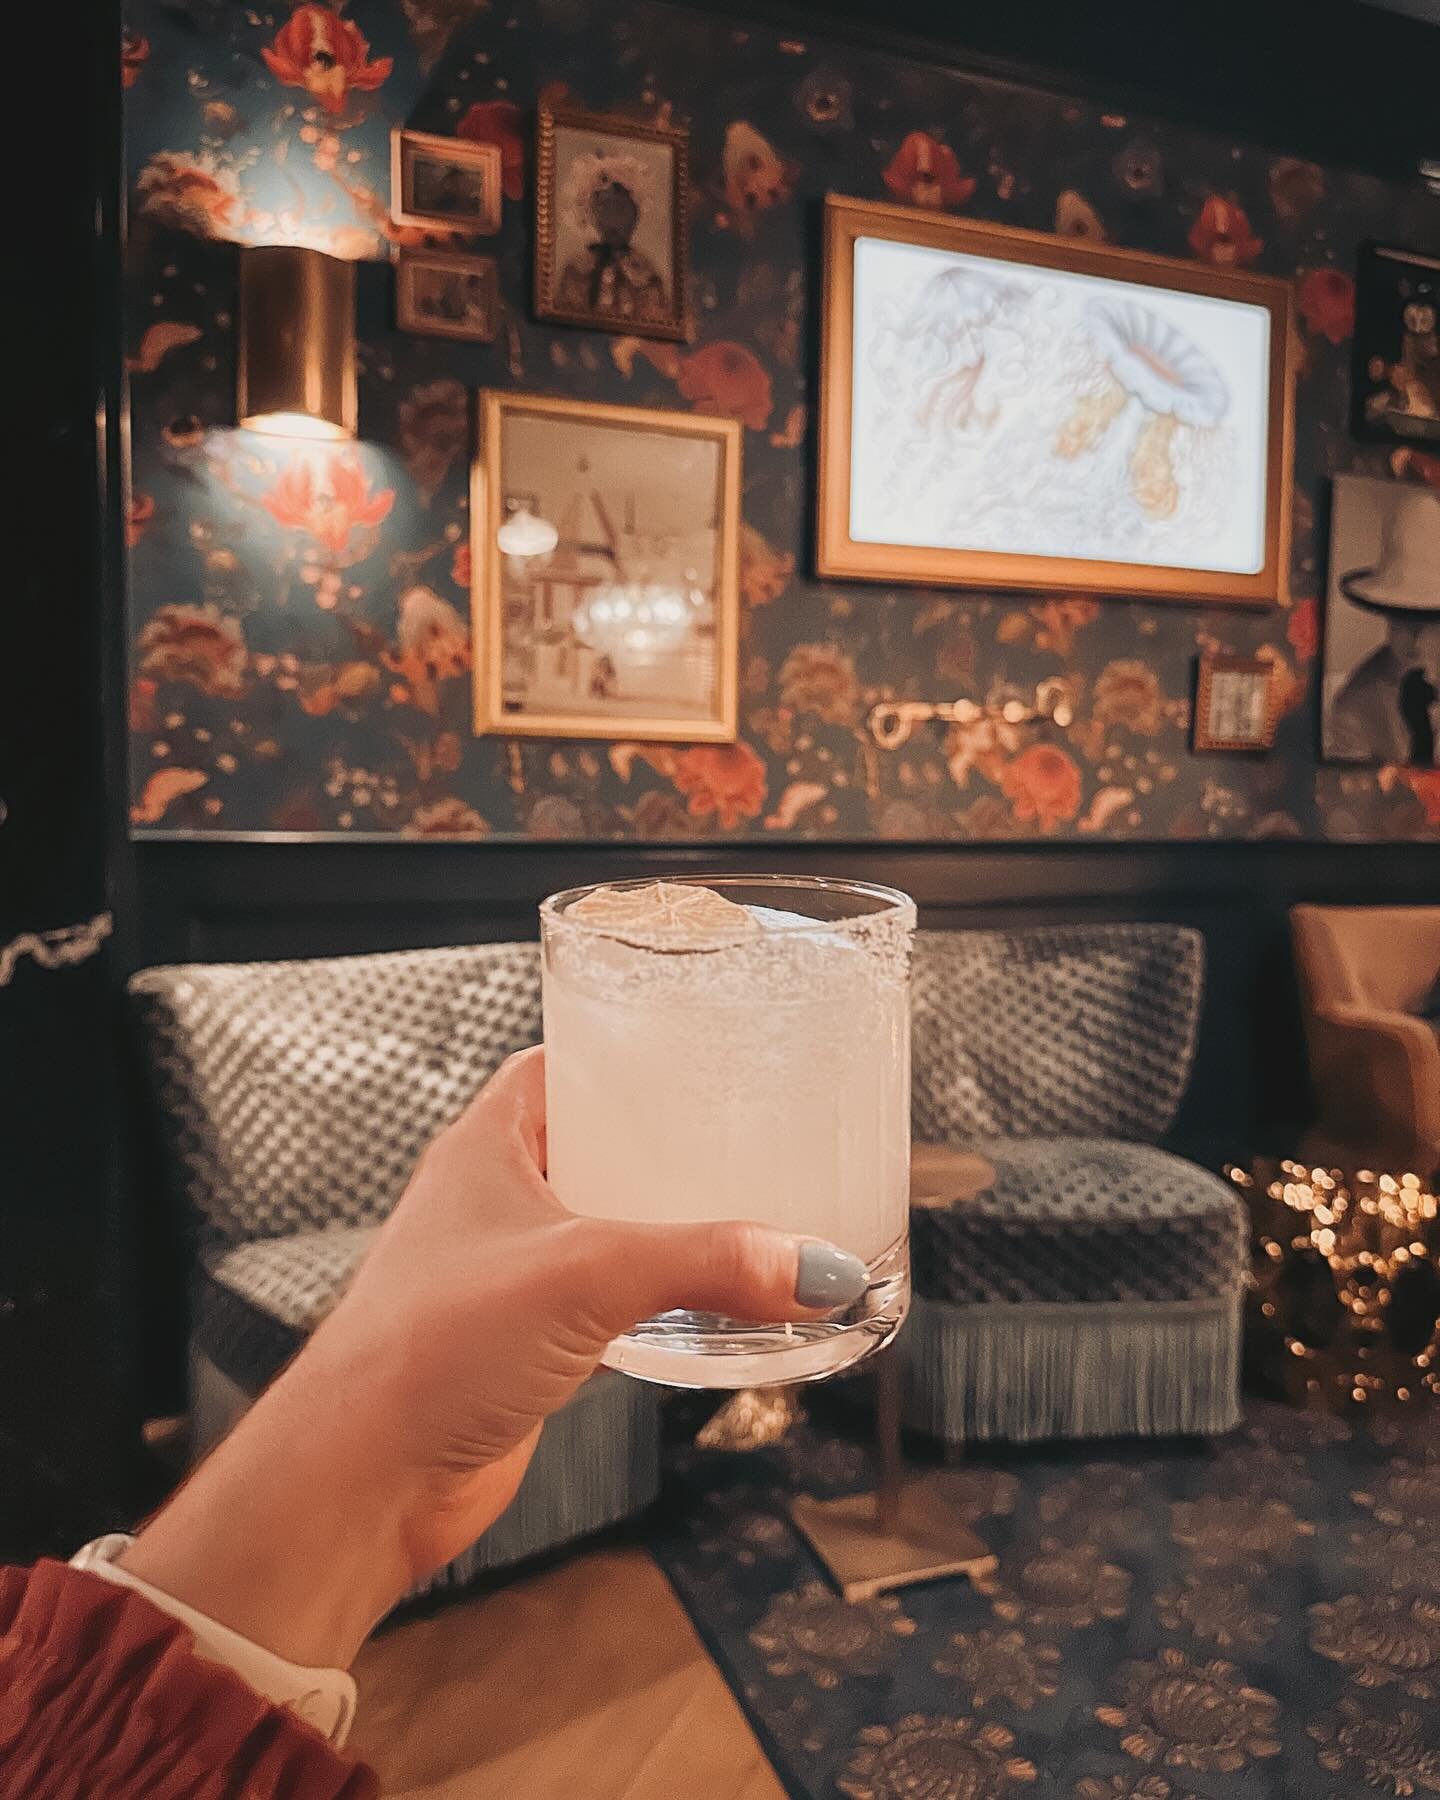 I&rsquo;m loving all the new bars and restaurants that are popping up throughout SF and I recently got ot checkout one of the new speakeasies that&rsquo;s opened up. My friend and I headed over to Left Door right above Bus Stop and the minute we walk